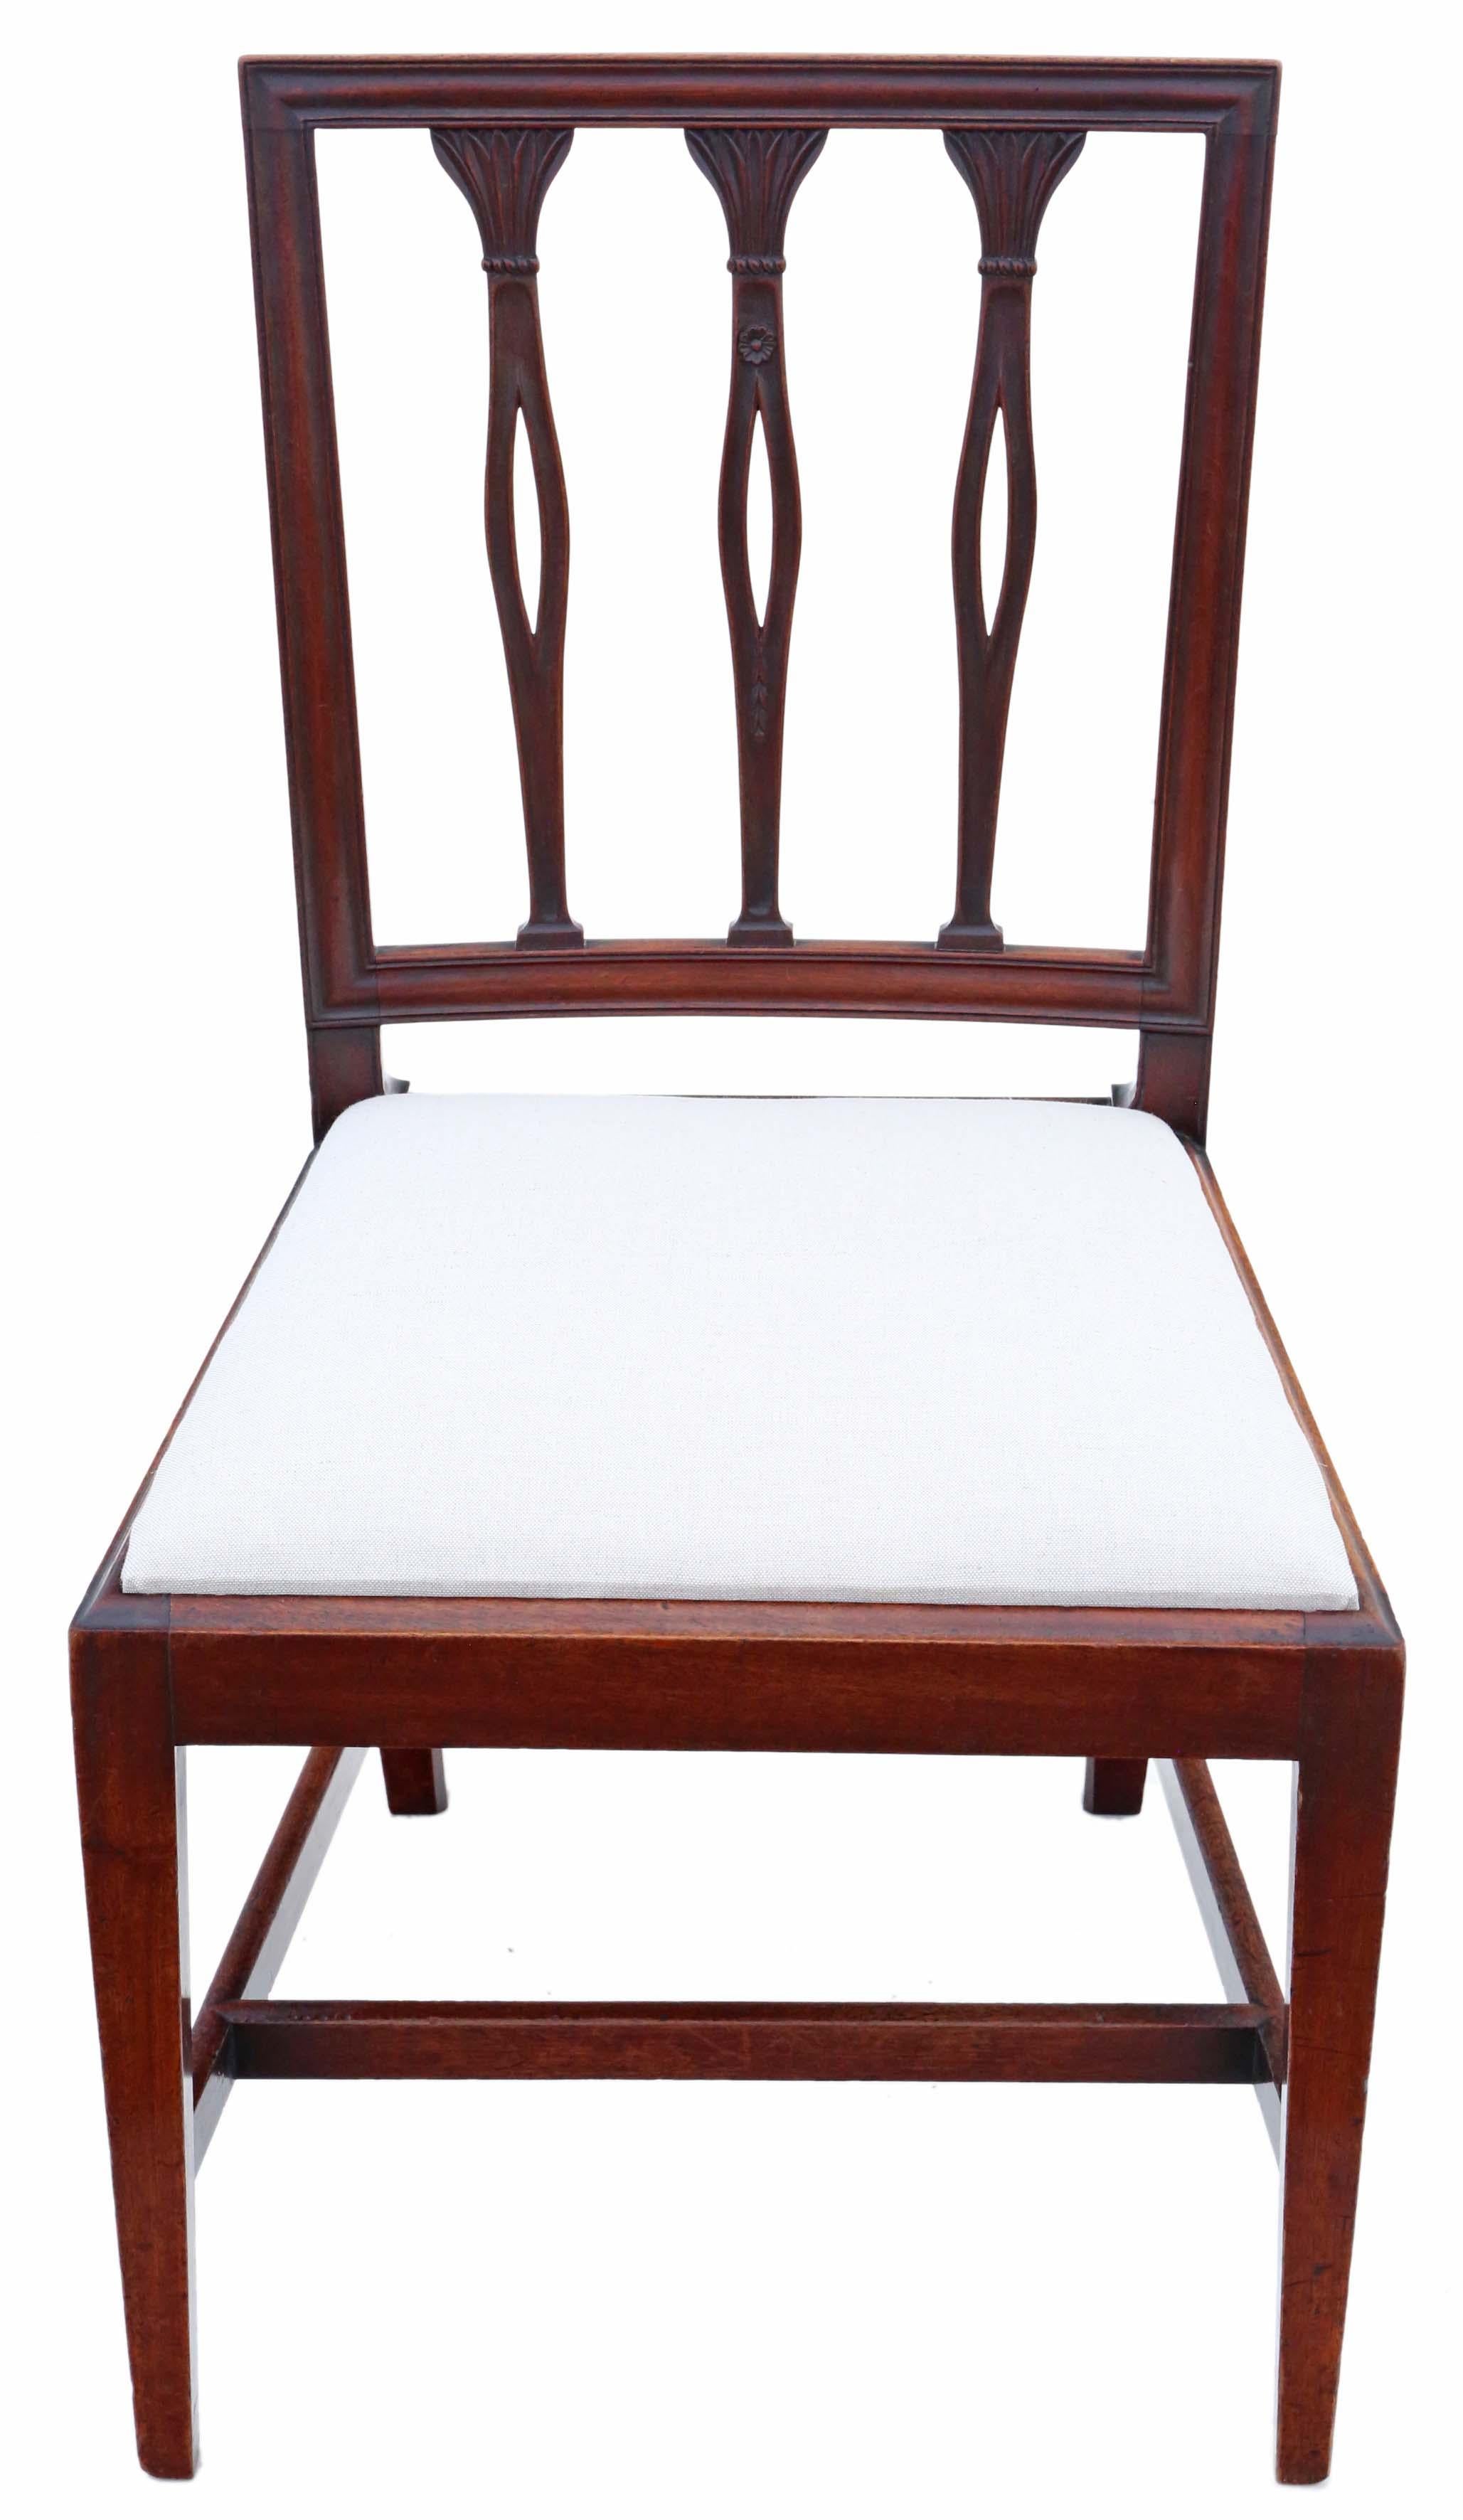 18th Century Mahogany Dining Chairs: Set of 8 (6 + 2), Antique Quality, C1820 For Sale 3